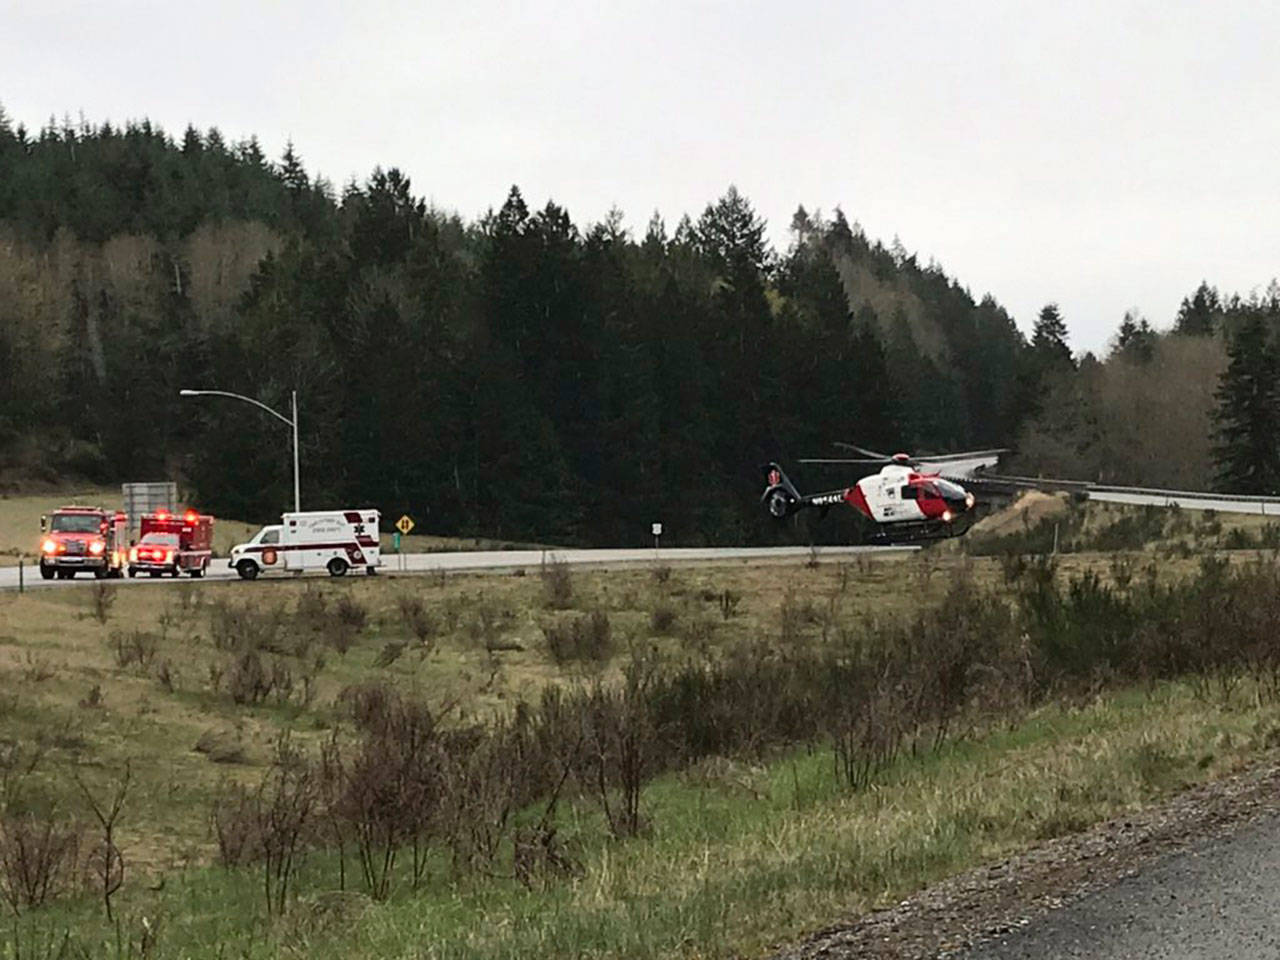 A Port Angeles man was airlifted to Harborview Medical Center on Monday after his truck collided with another vehicle on U.S. Highway 101 north of Quilcene. (Washington State Patrol)